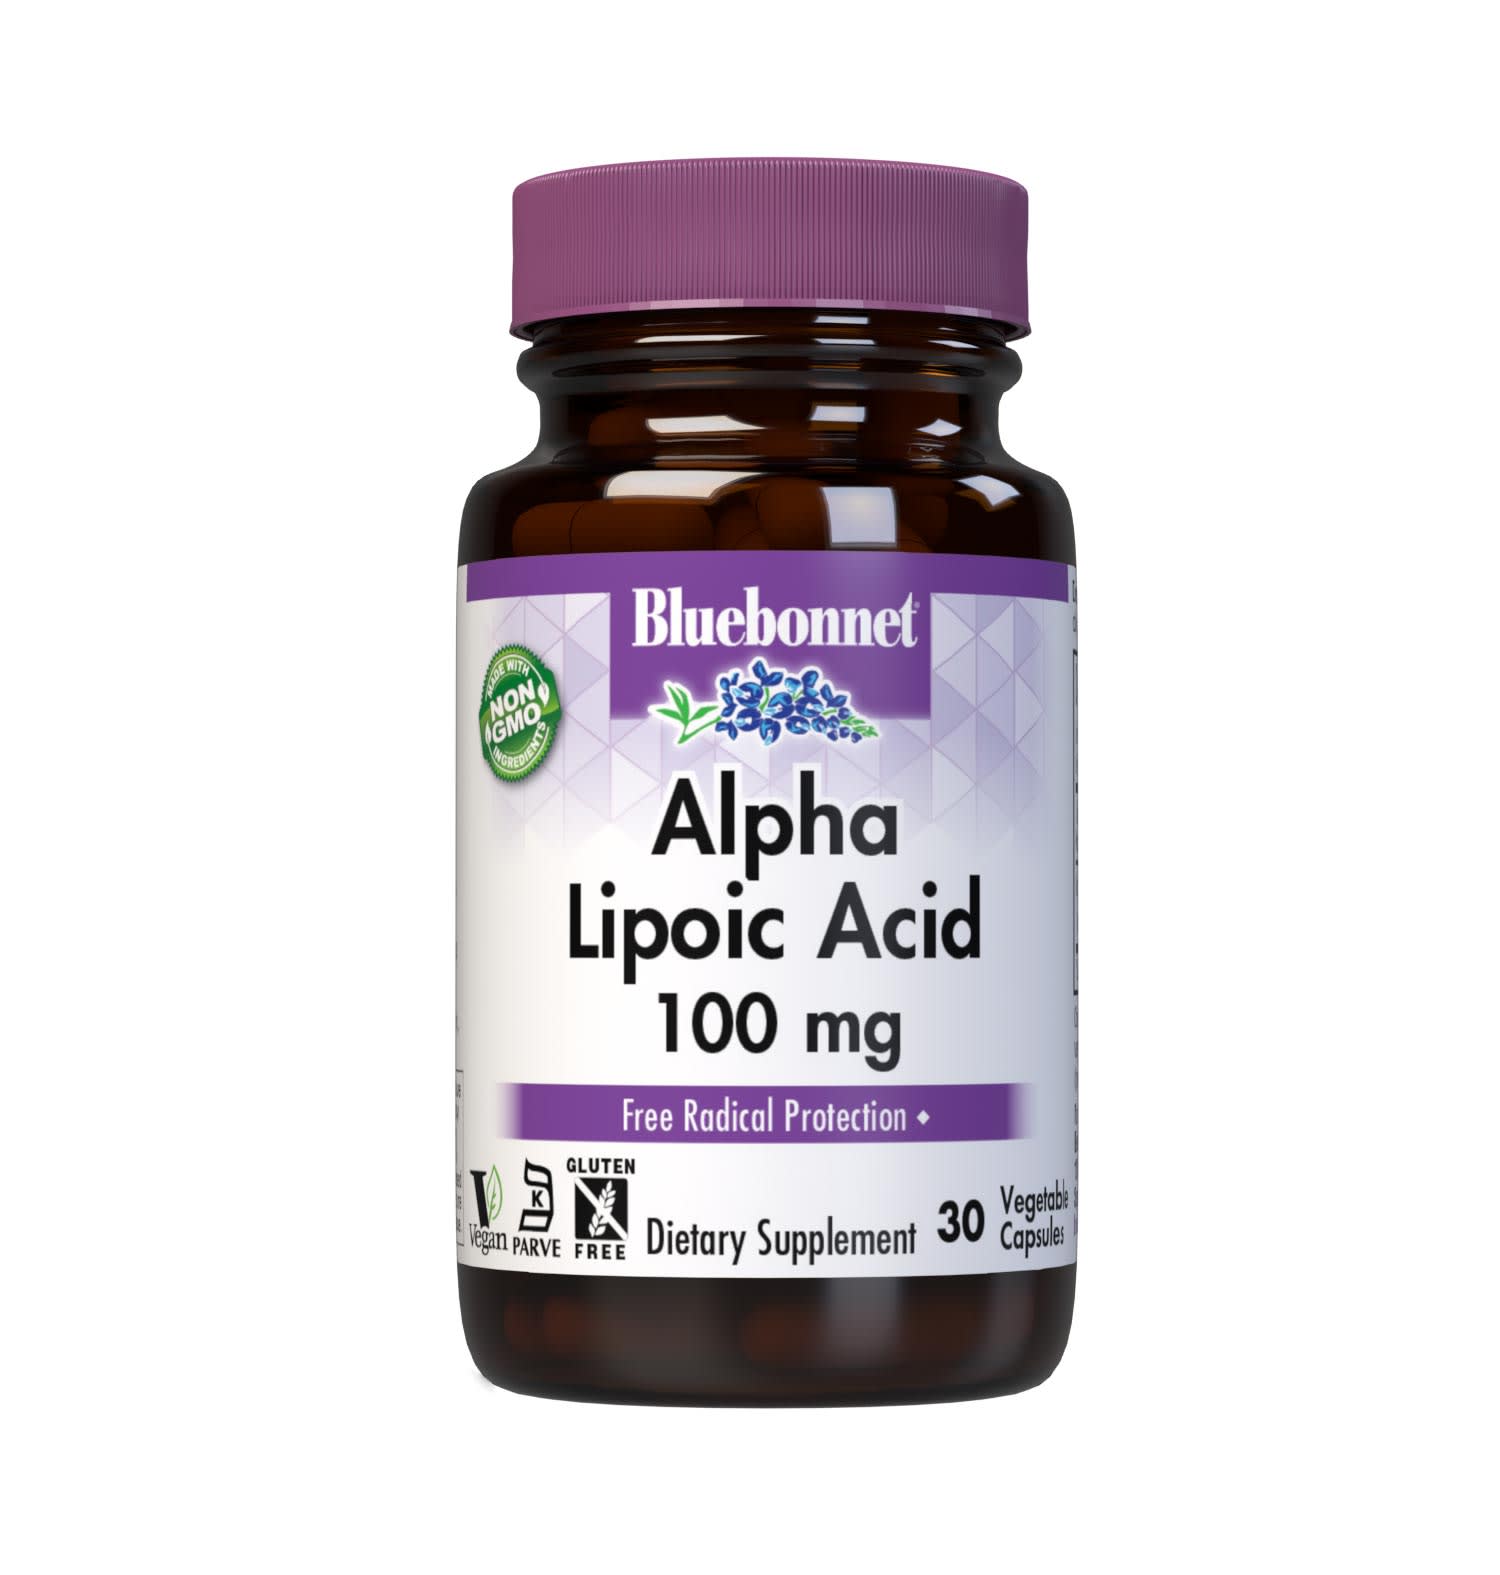 Bluebonnet’s Alpha Lipoic Acid 100 mg 30 Vegetable Capsules are formulated with alpha lipoic acid from thiotic acid. Alpha lipoic acid is a unique fat-soluble and water-soluble nutrient that is known for its free radical scavenger activity. #size_30 count